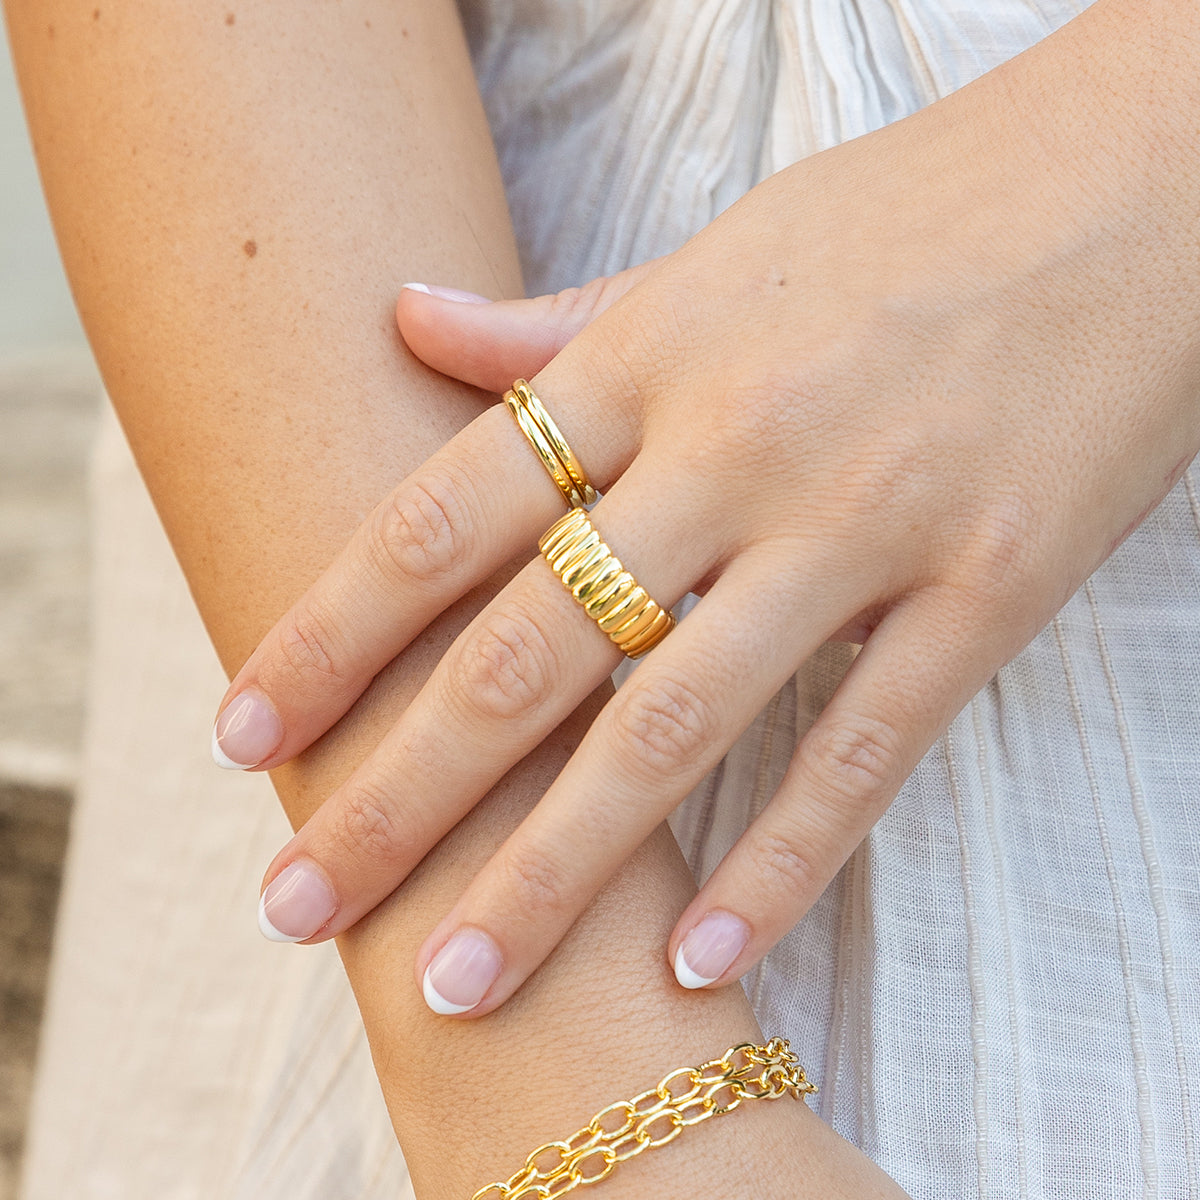 Parthenon Ribbed Ring | Gold | Model Image | Uncommon James